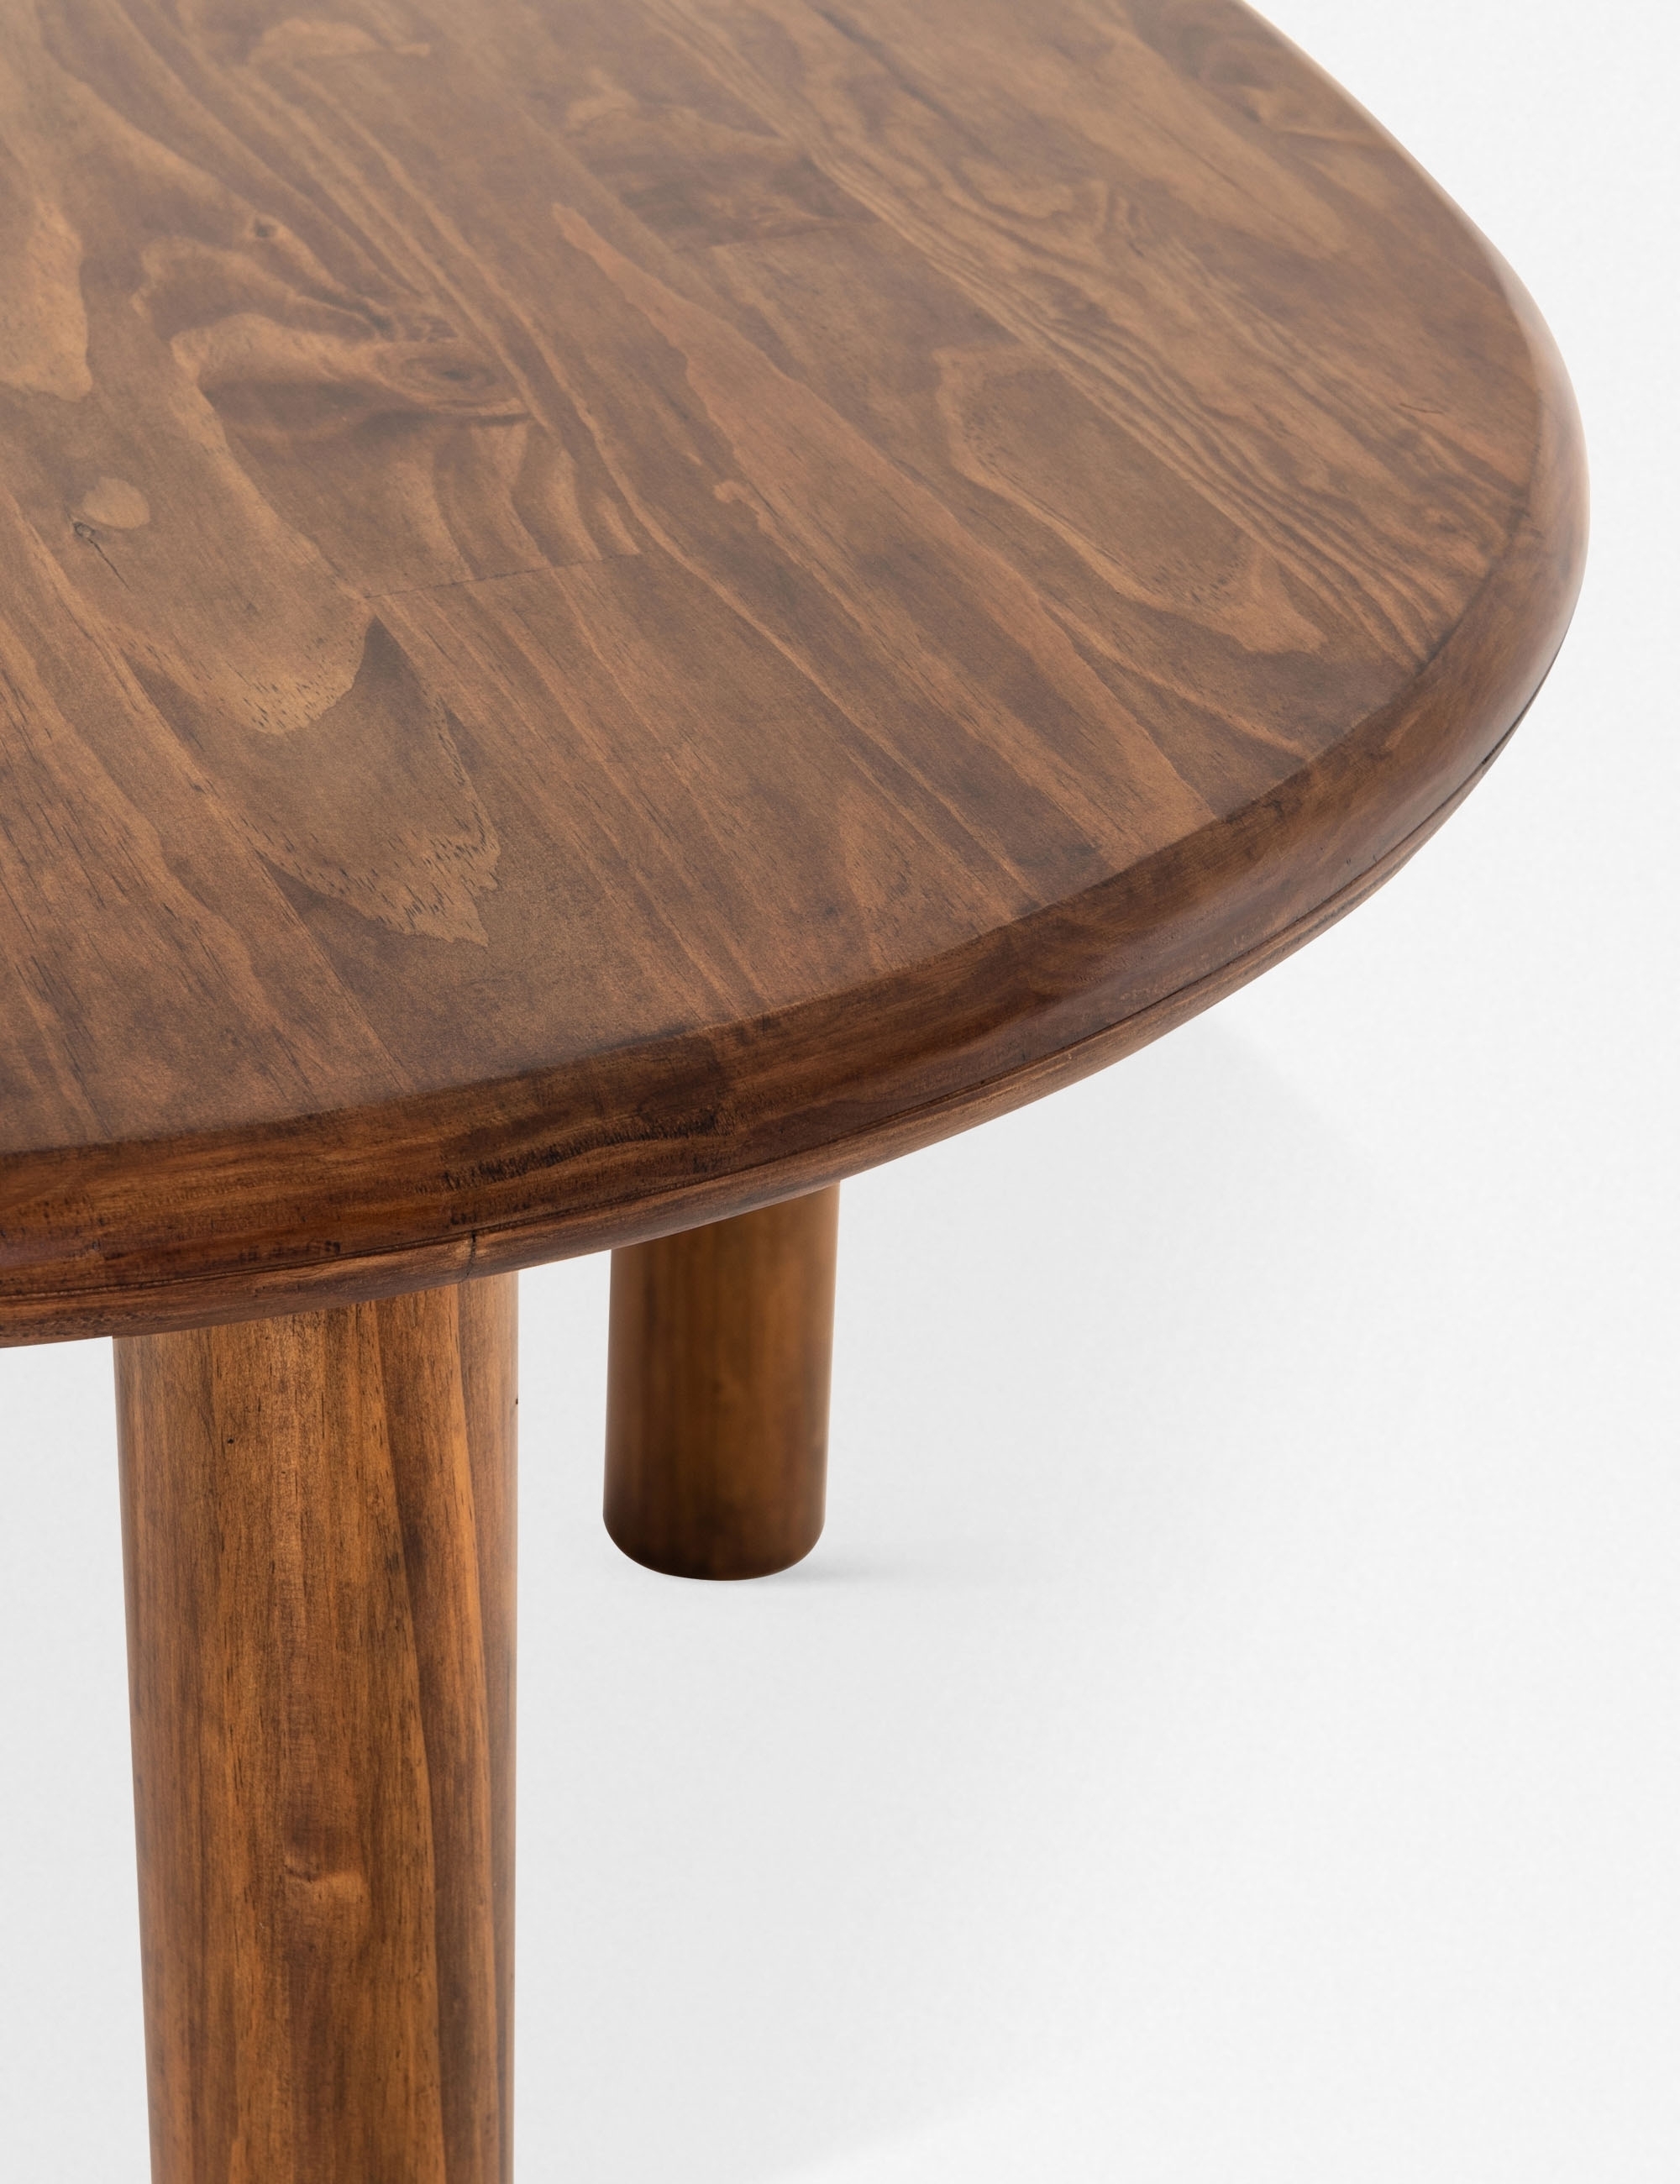 Marquesa Dining Table - Image 7